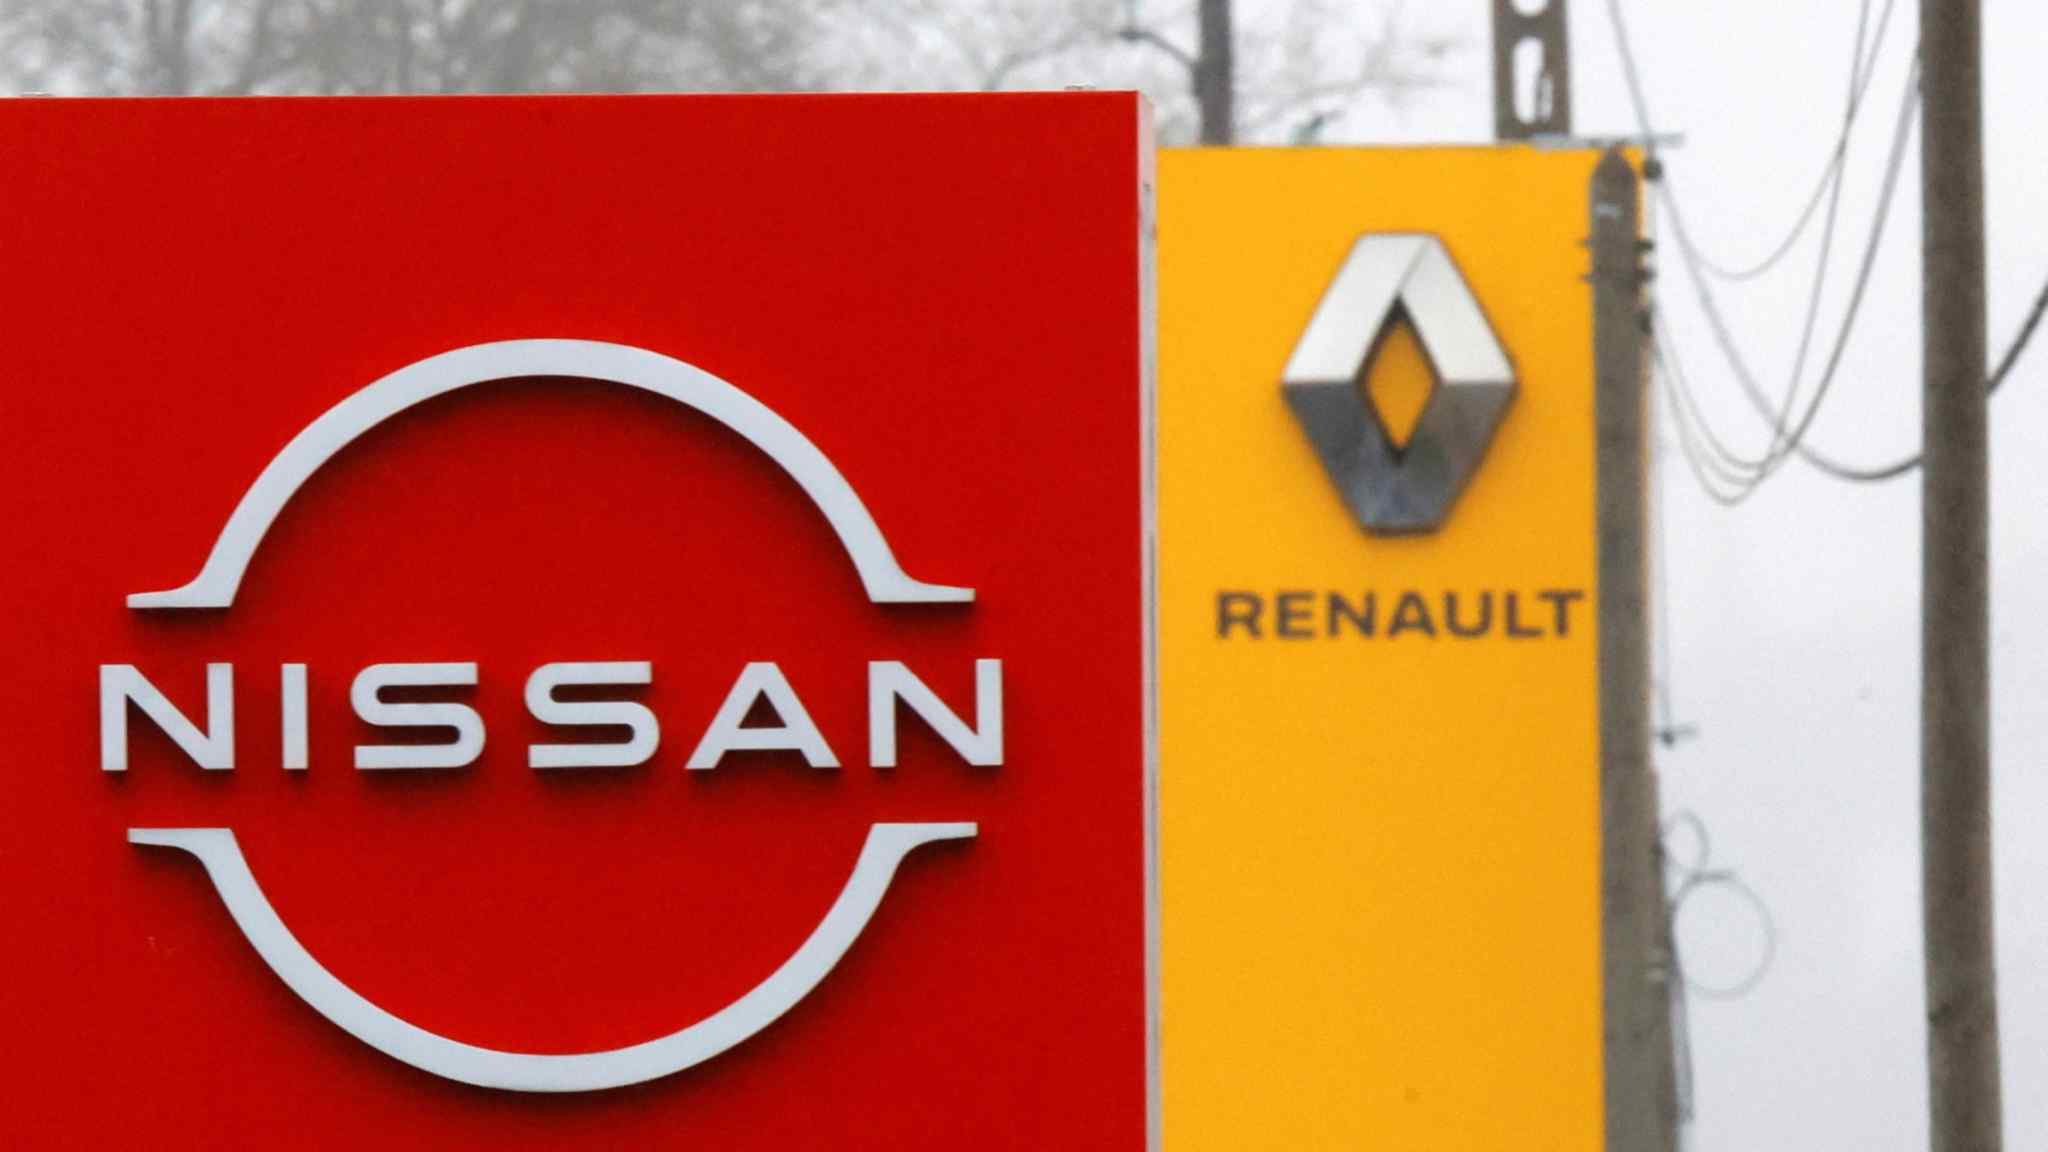 Renault and Nissan hammer out historic deal to salvage alliance